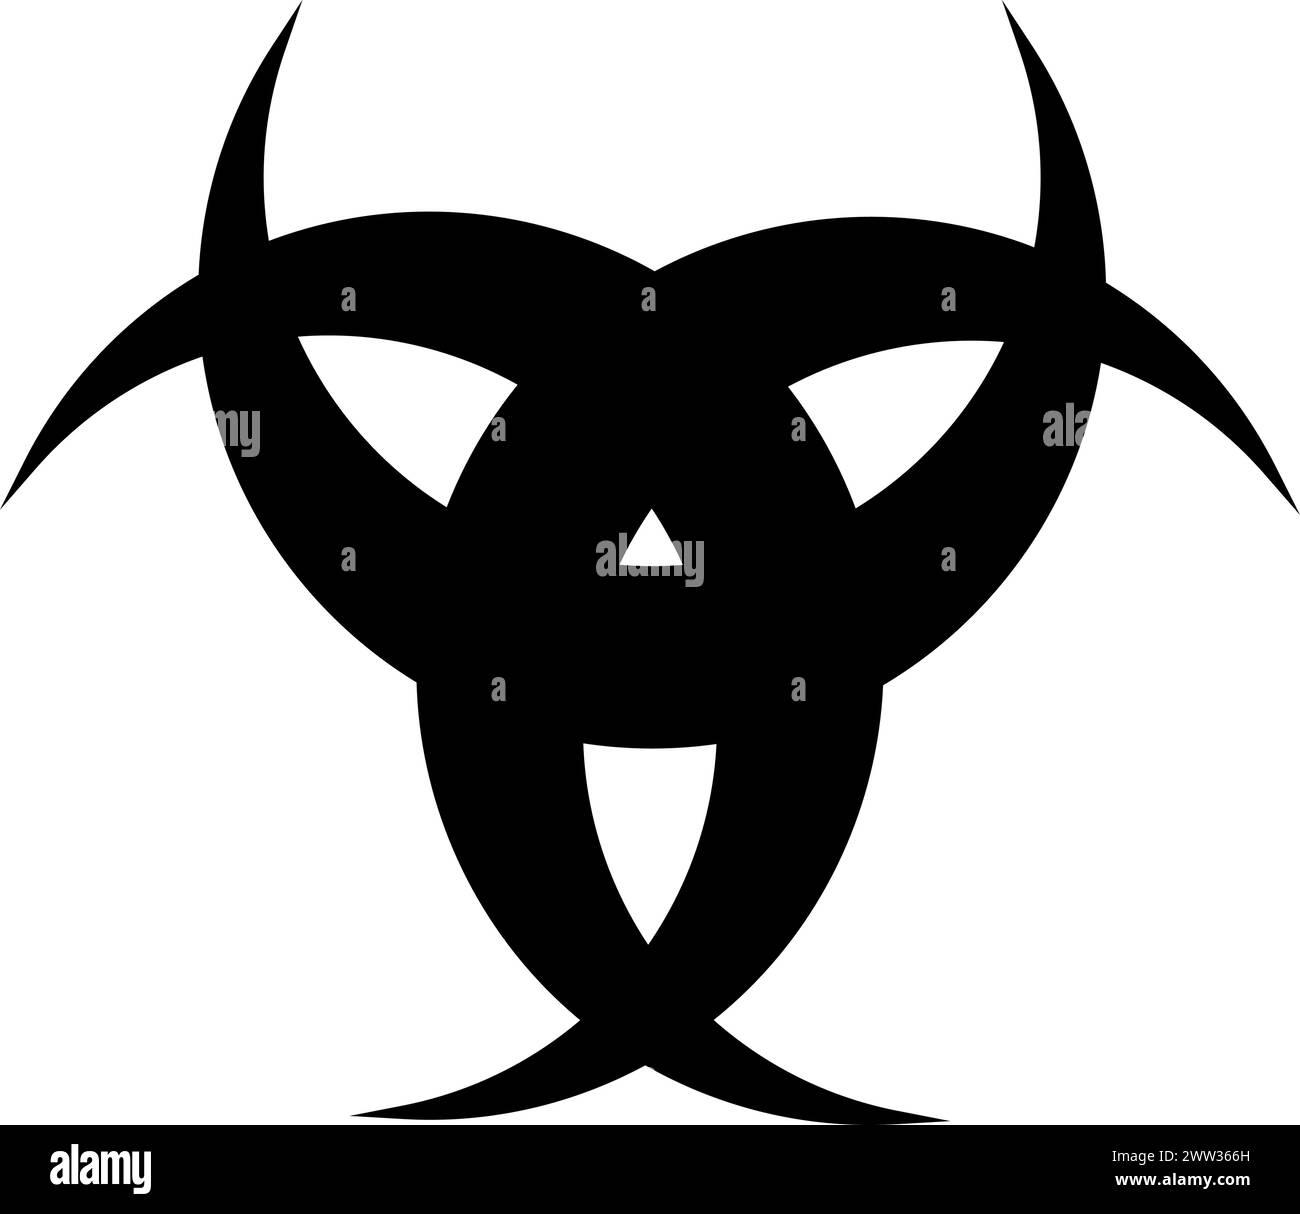 Trinity amulet mystical religious symbol. Spiritual hornthree sign of traditional culture of worship and veneration. Simple black and white vector iso Stock Vector